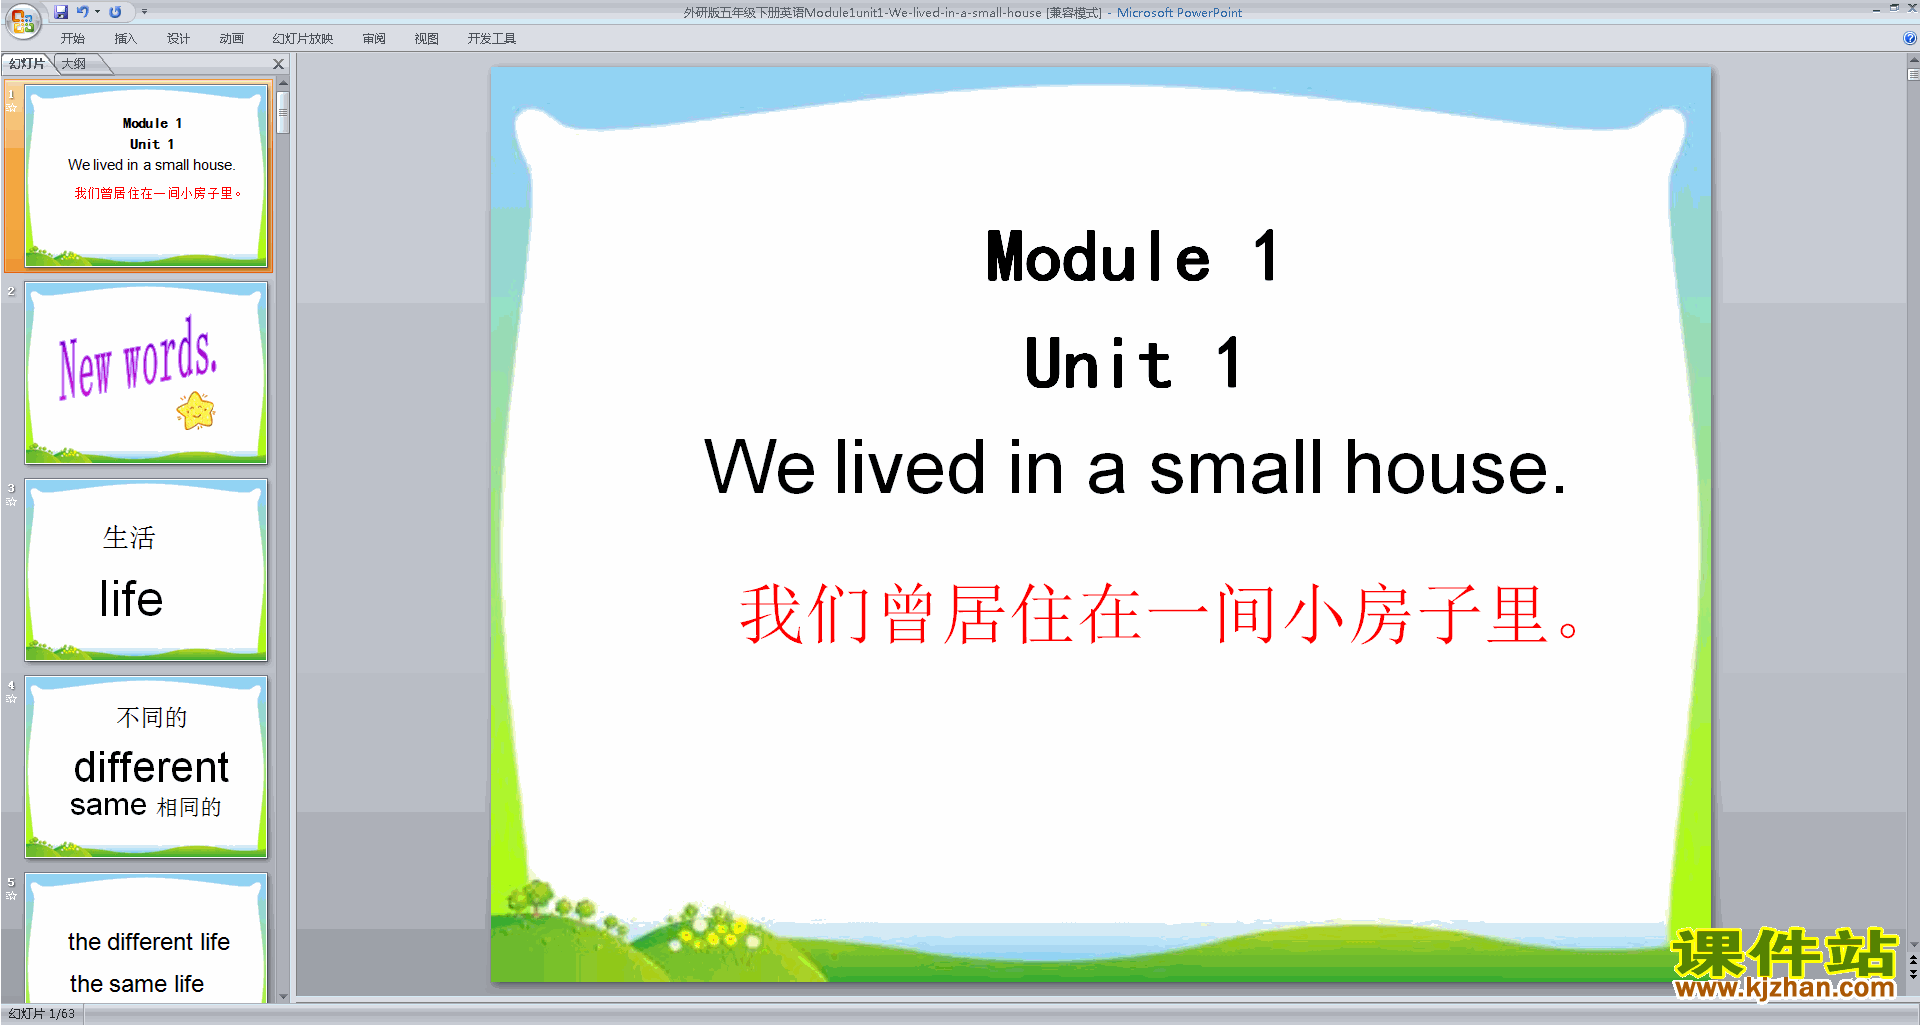 пModule1 Unit1 We lived in a small housepptμ